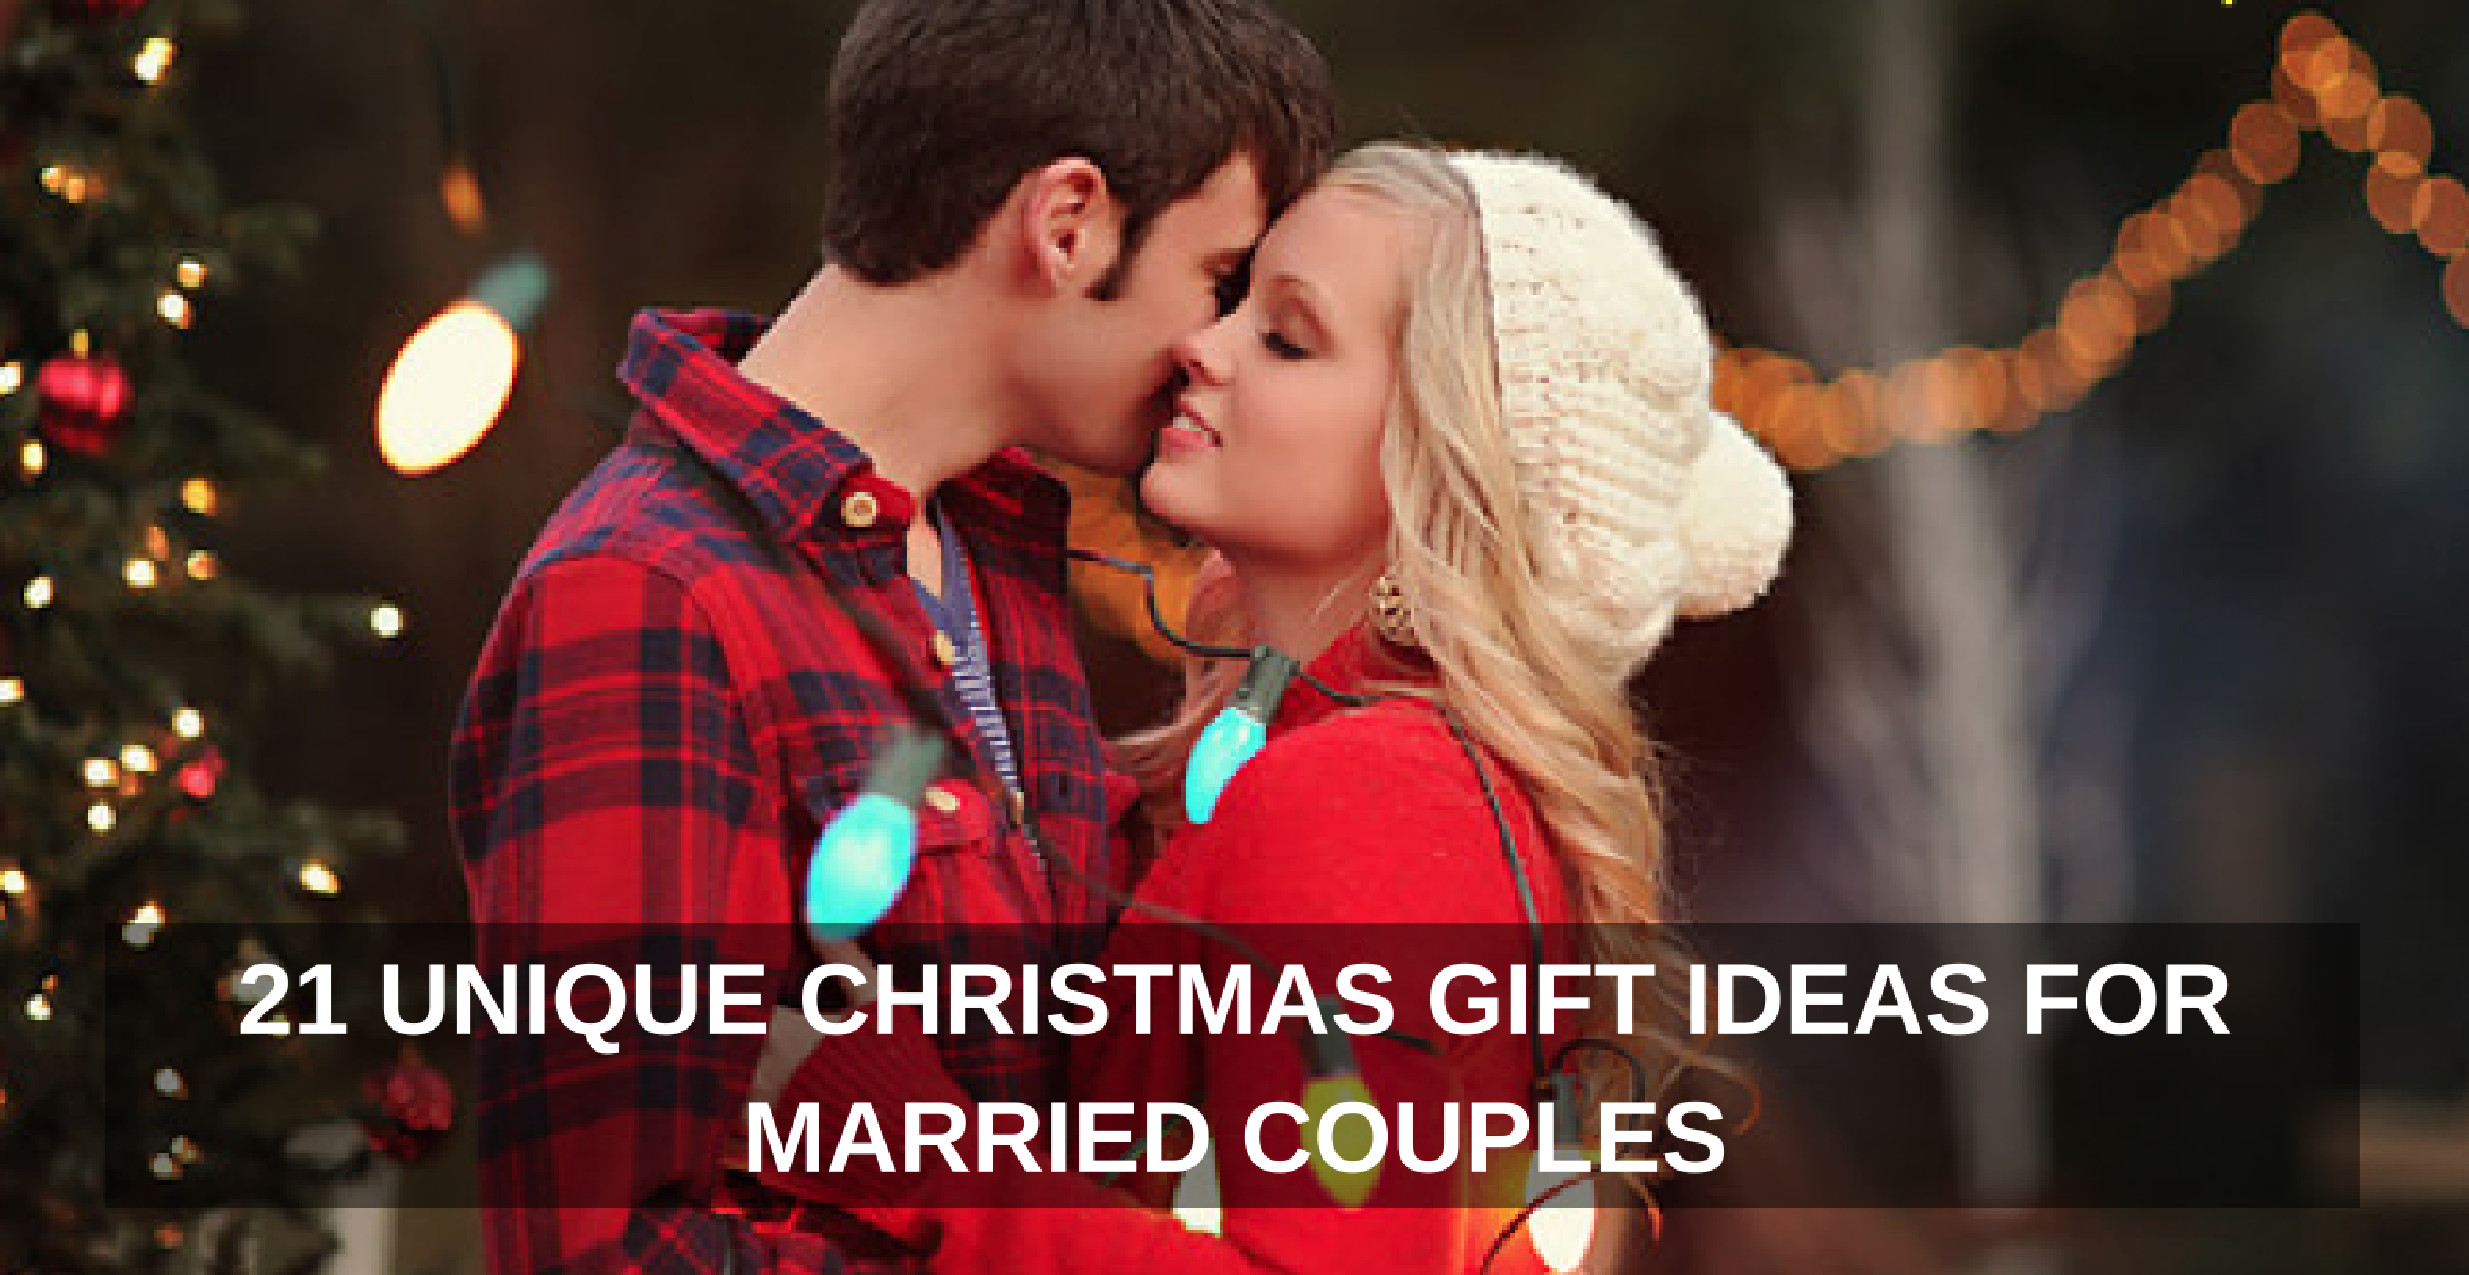 Fun Gift Ideas For Couples
 21 Unique Christmas Gift Ideas for Married Couples